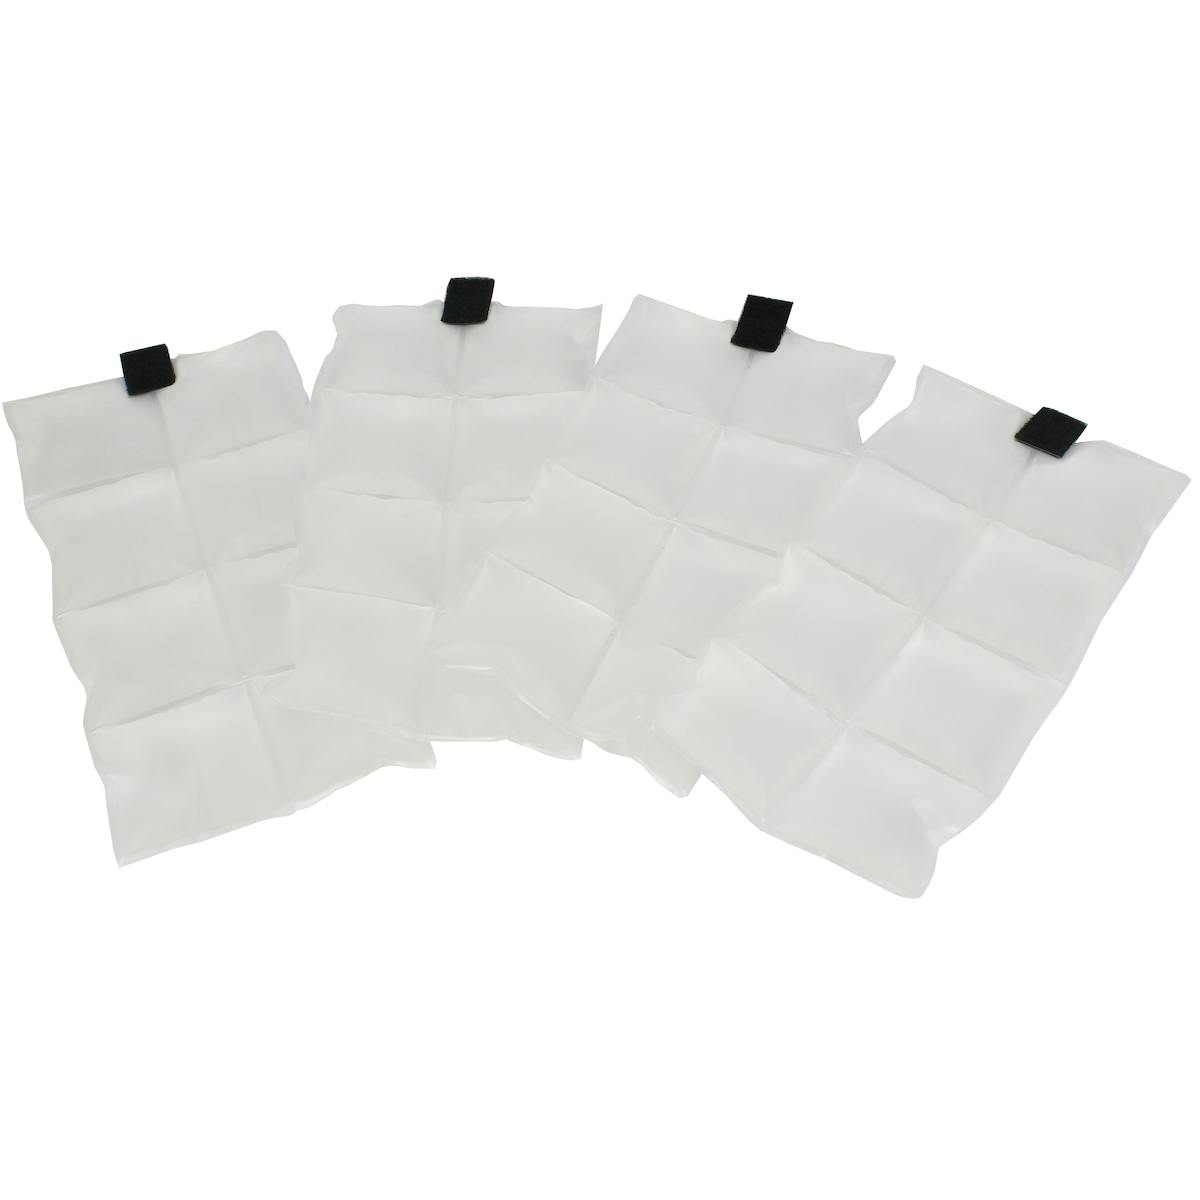 Replacement Phase Change Cooling Packs - 4 Pack, Clear (390-HY099) - OS_0